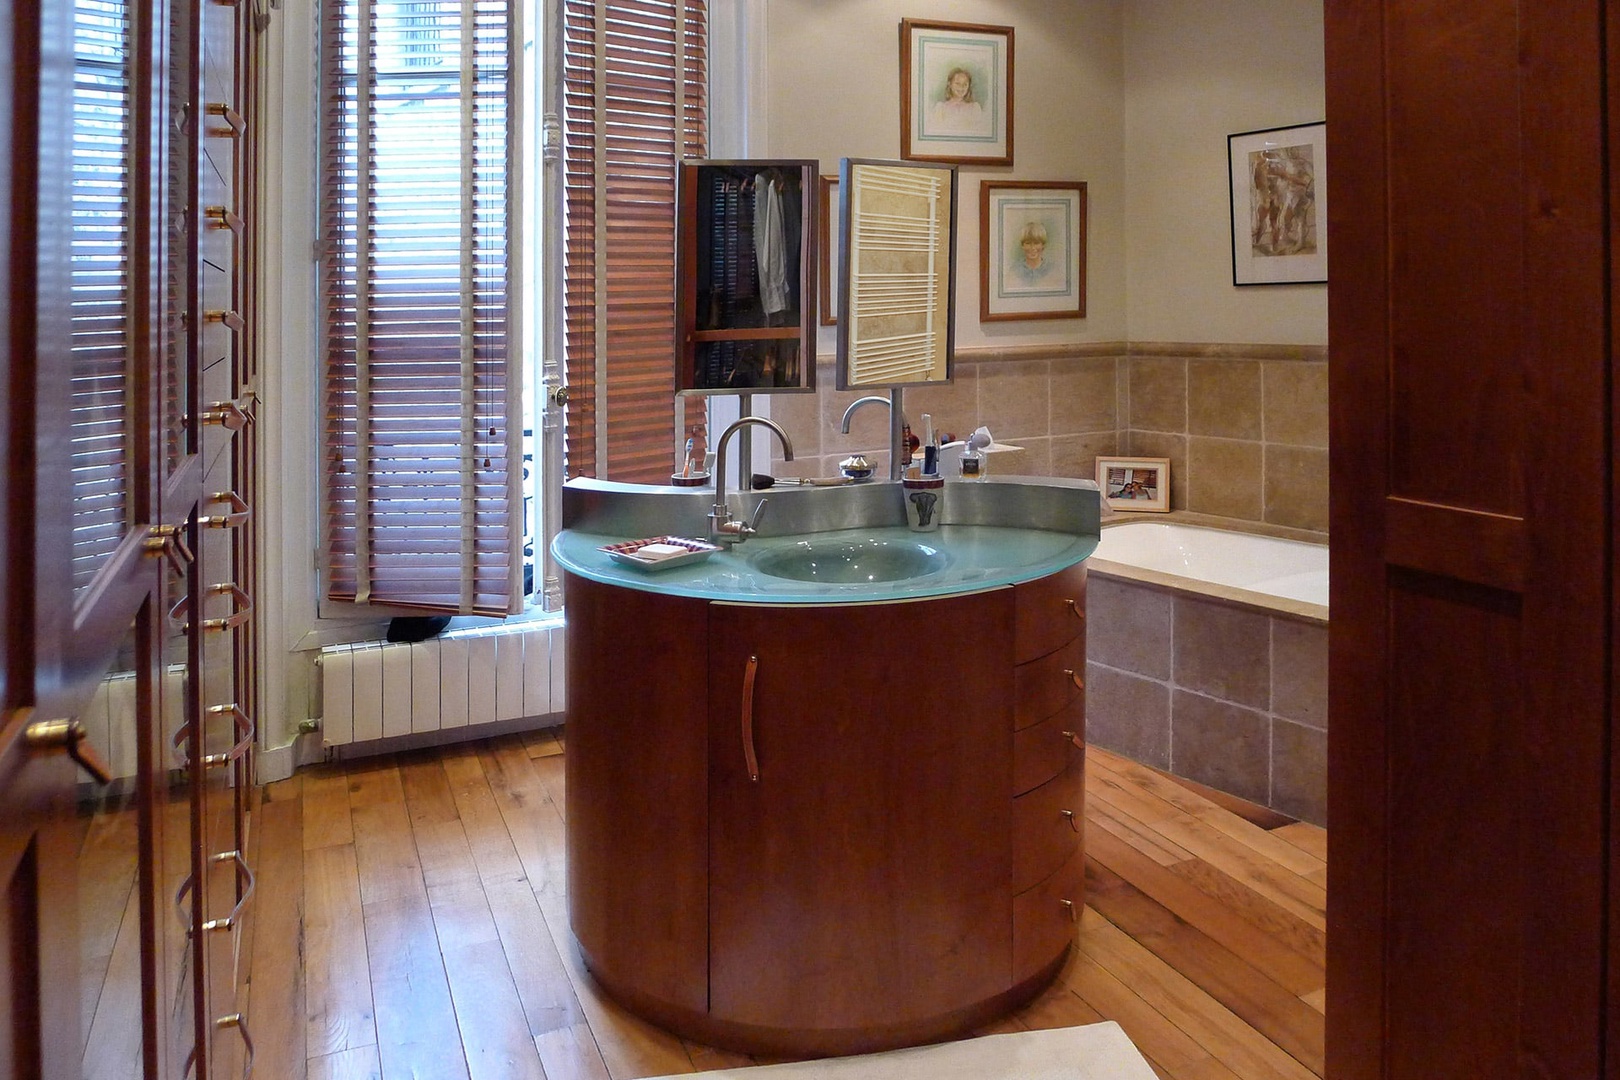 Start your day in bathroom 1 with this gorgeous woodwork.